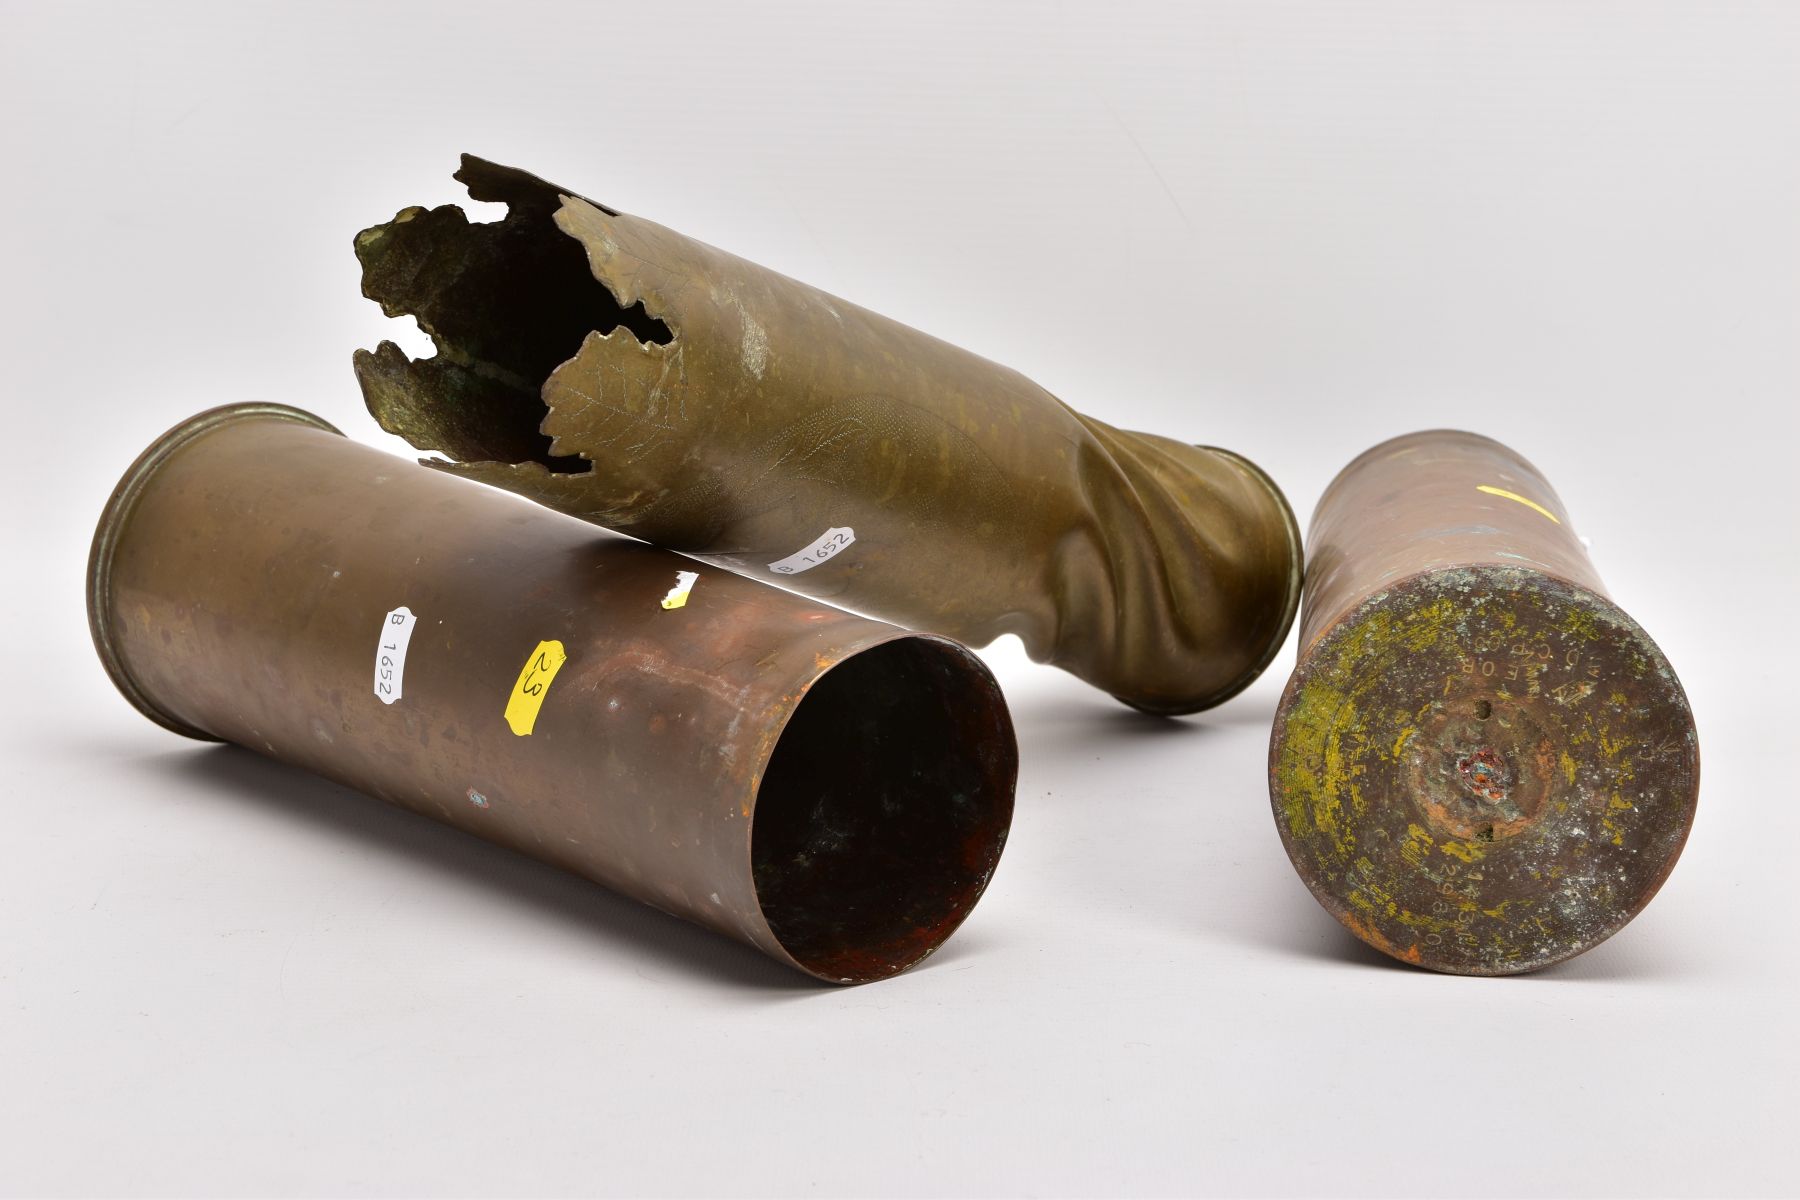 THREE WWI ERA SHELL CASES, one in Trench Art form, hammered giving the effect of being twisted, - Image 3 of 4